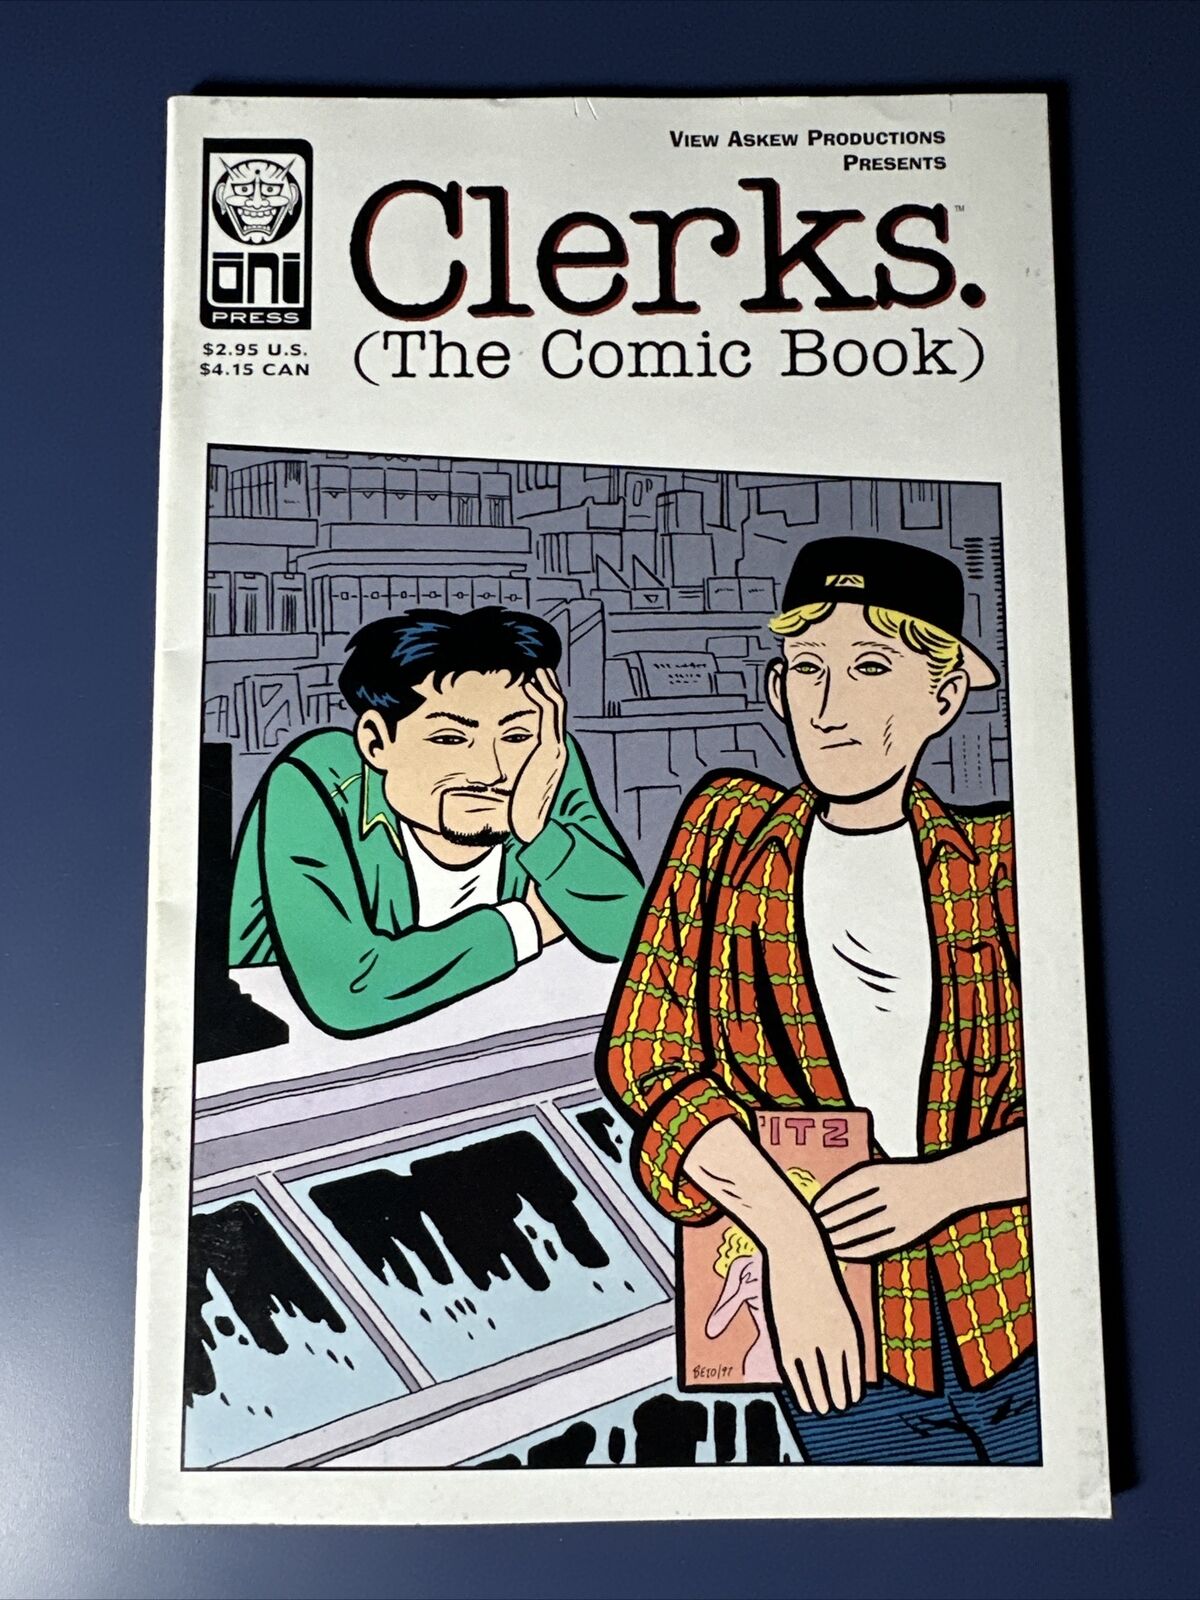 CLERKS THE COMIC BOOK #1 ONI F/VF 2nd Print View Askew Productions Presents